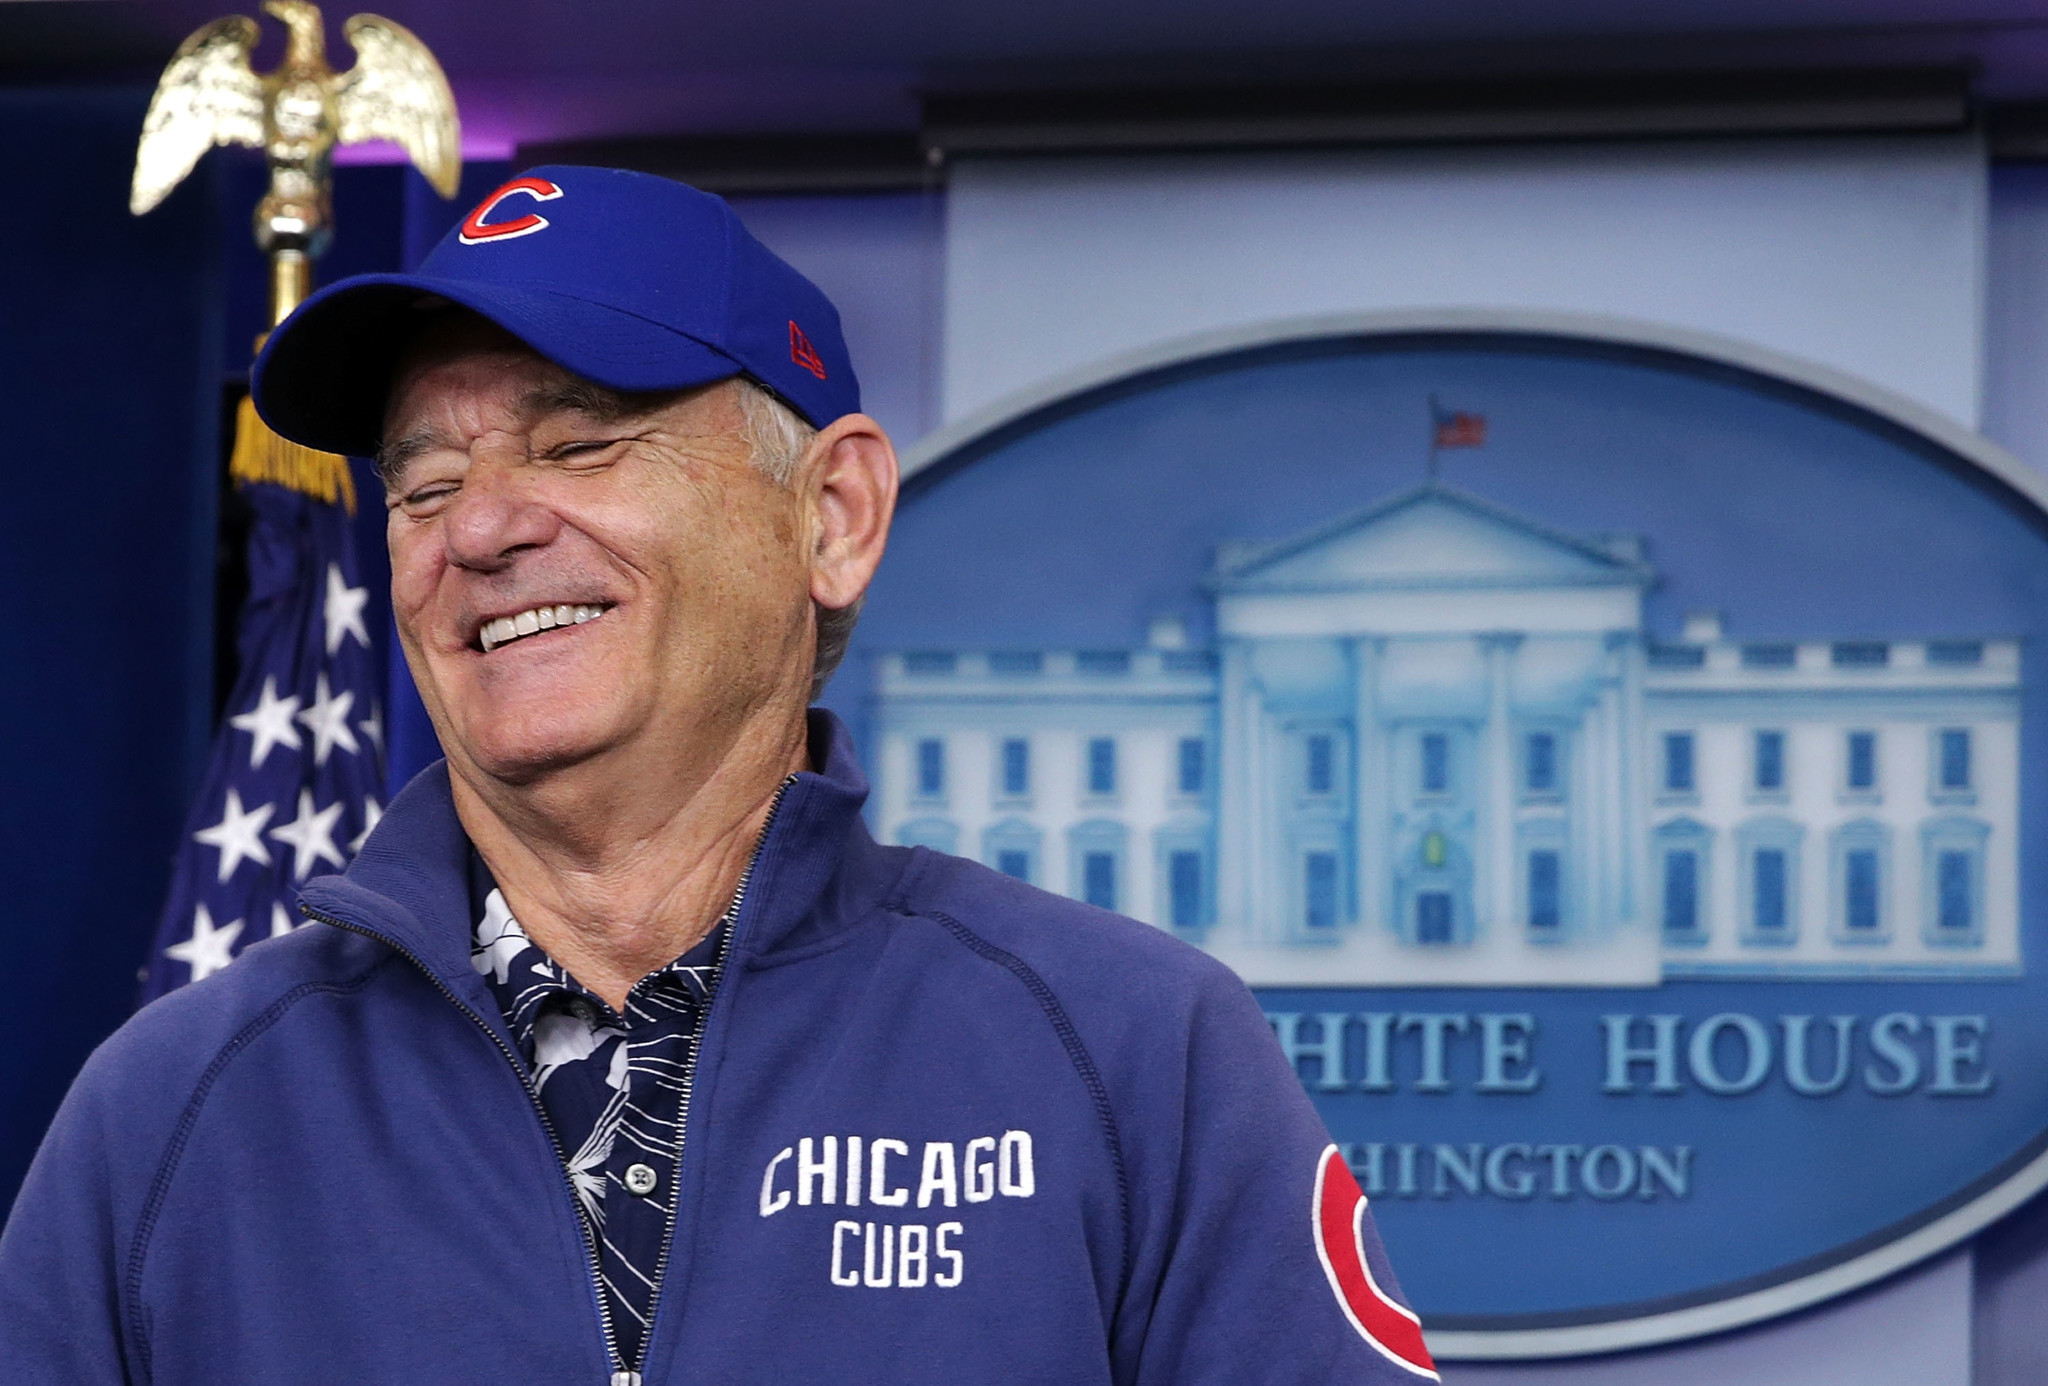 Bill Murray, wearing a Cubs hat, crashes White House press briefing